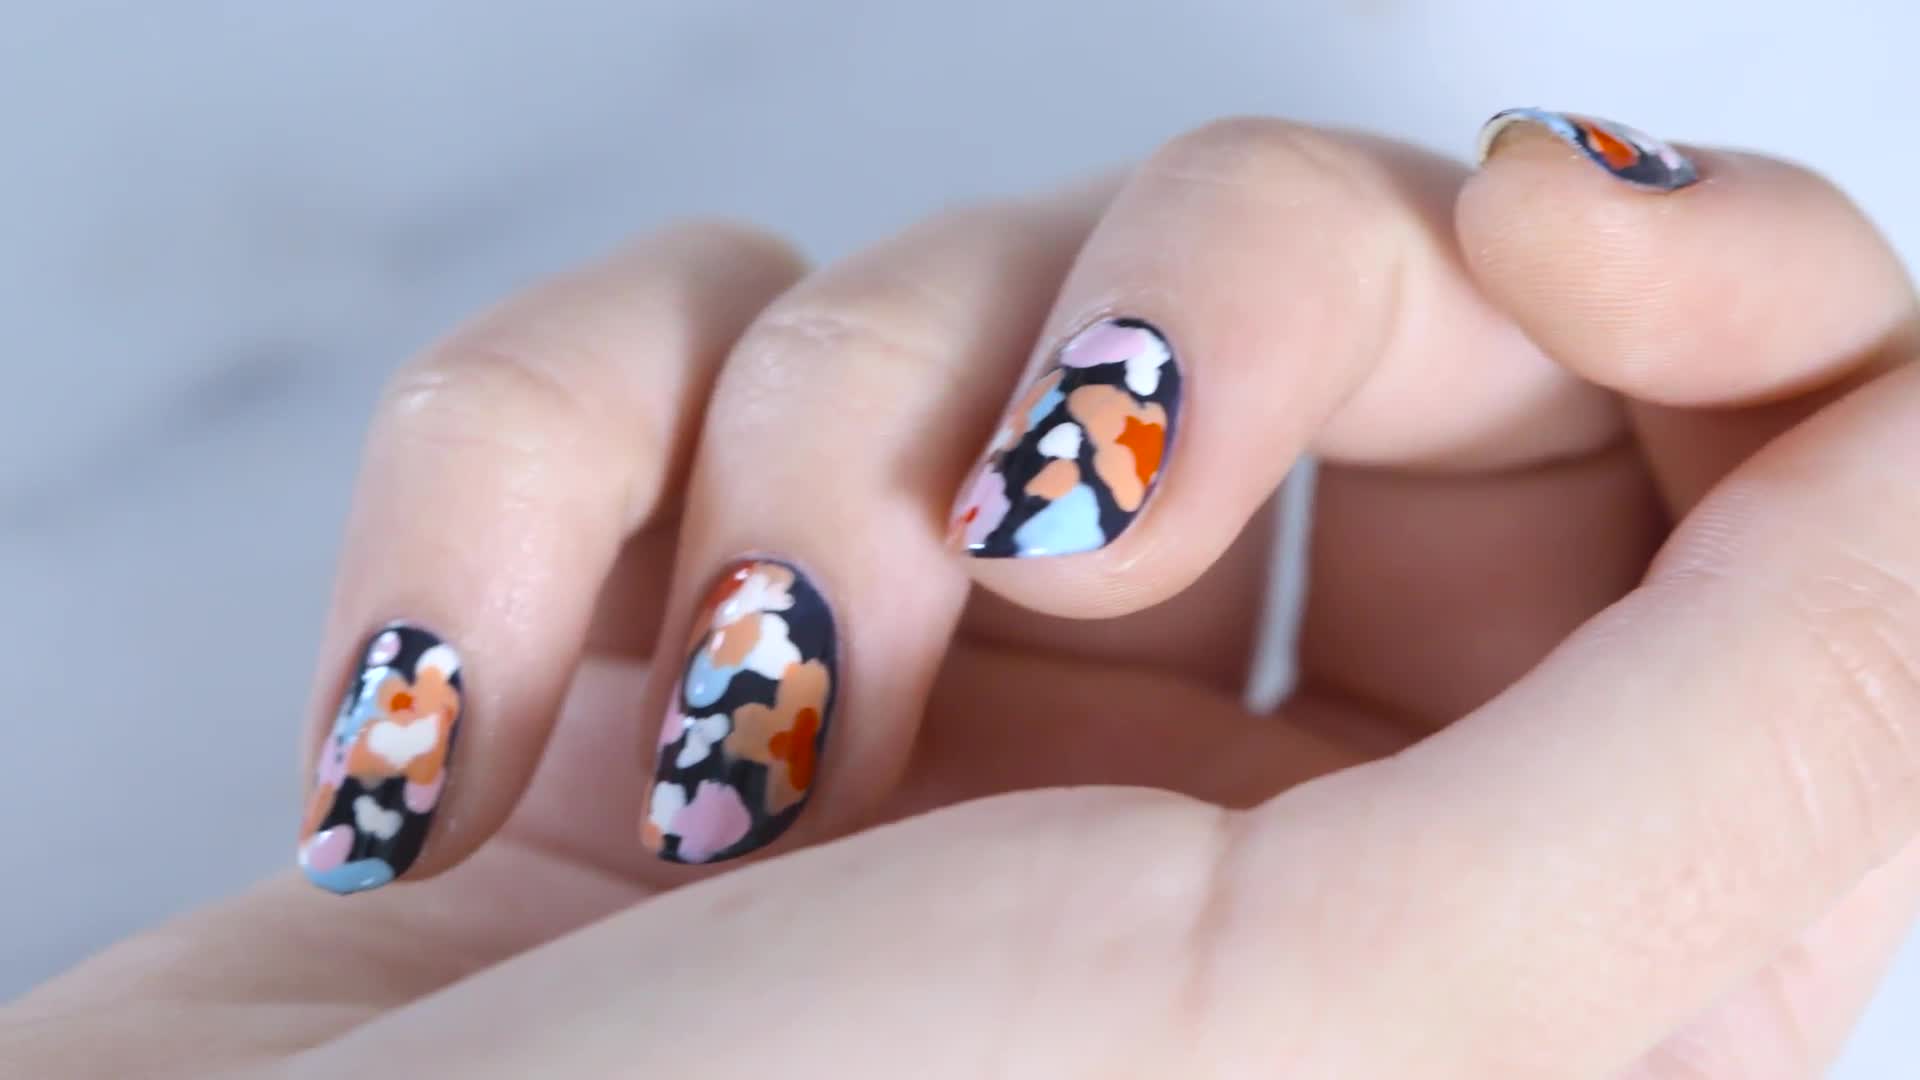 NO TOOLS NAILS HACK - NAIL ART FOR BEGINNERS (Holo, Dots/Spots, Flowers,  Galaxy) - YouTube